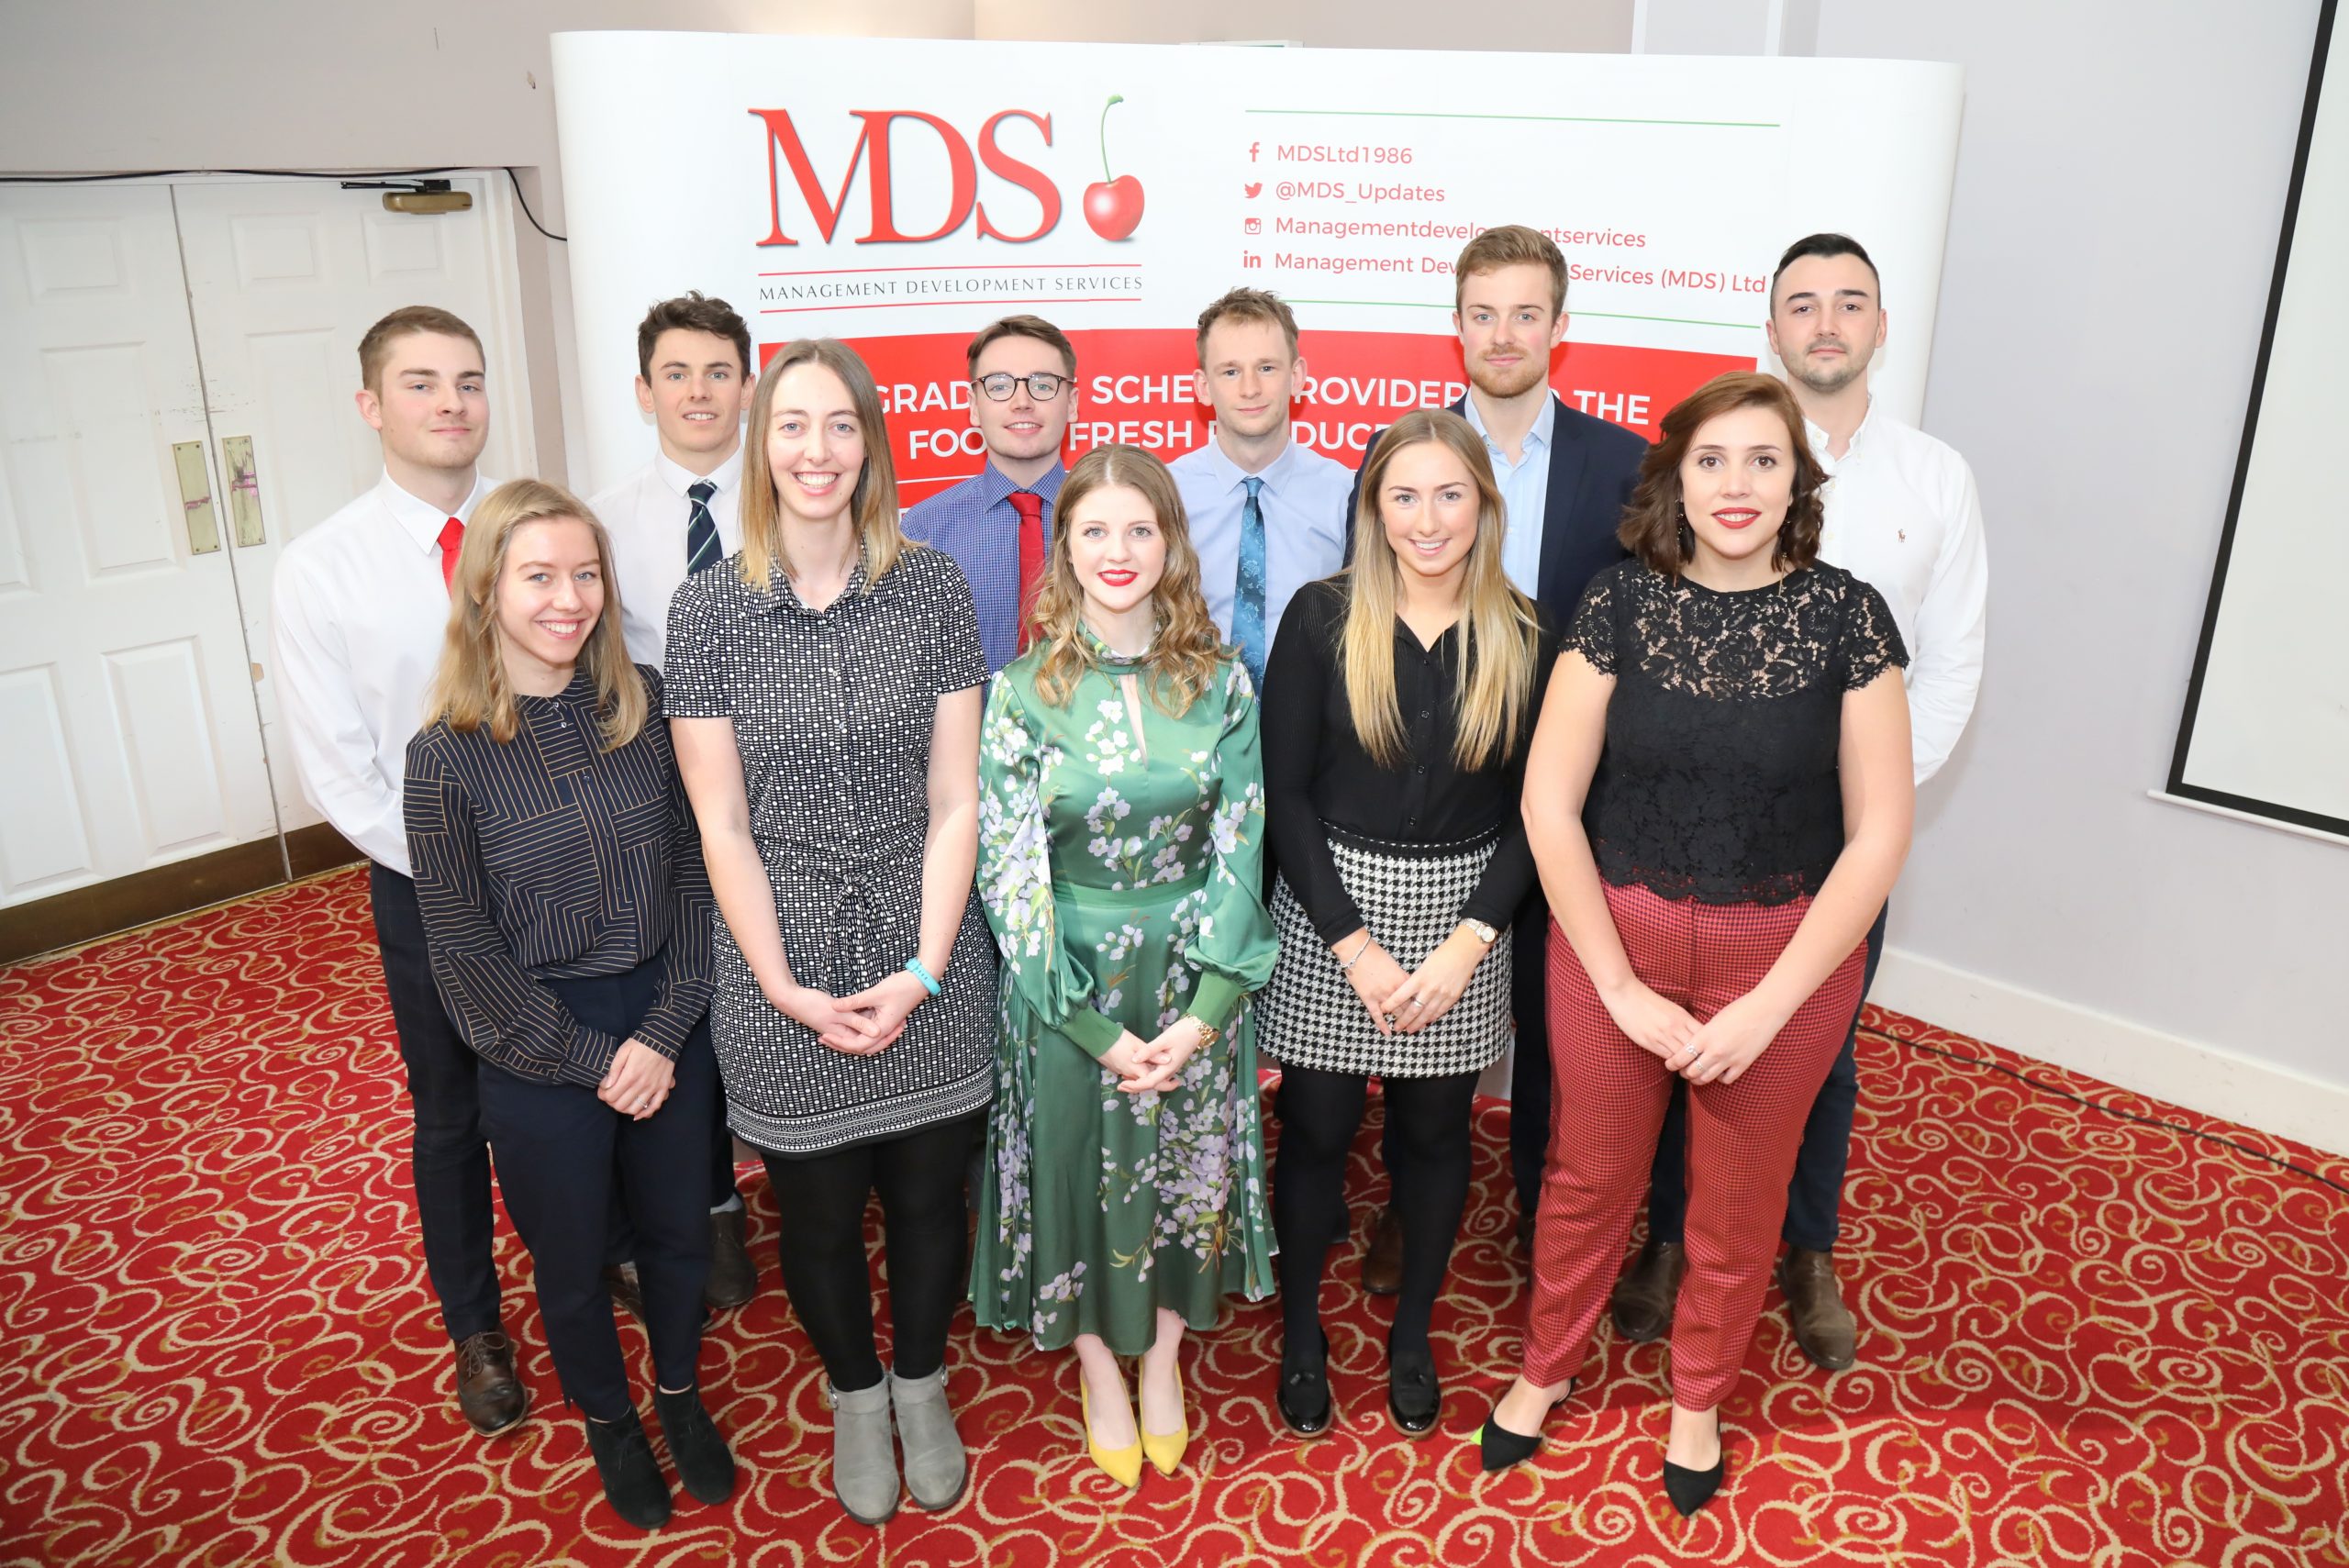 Record numbers of Trainees taking on permanent roles with Member companies